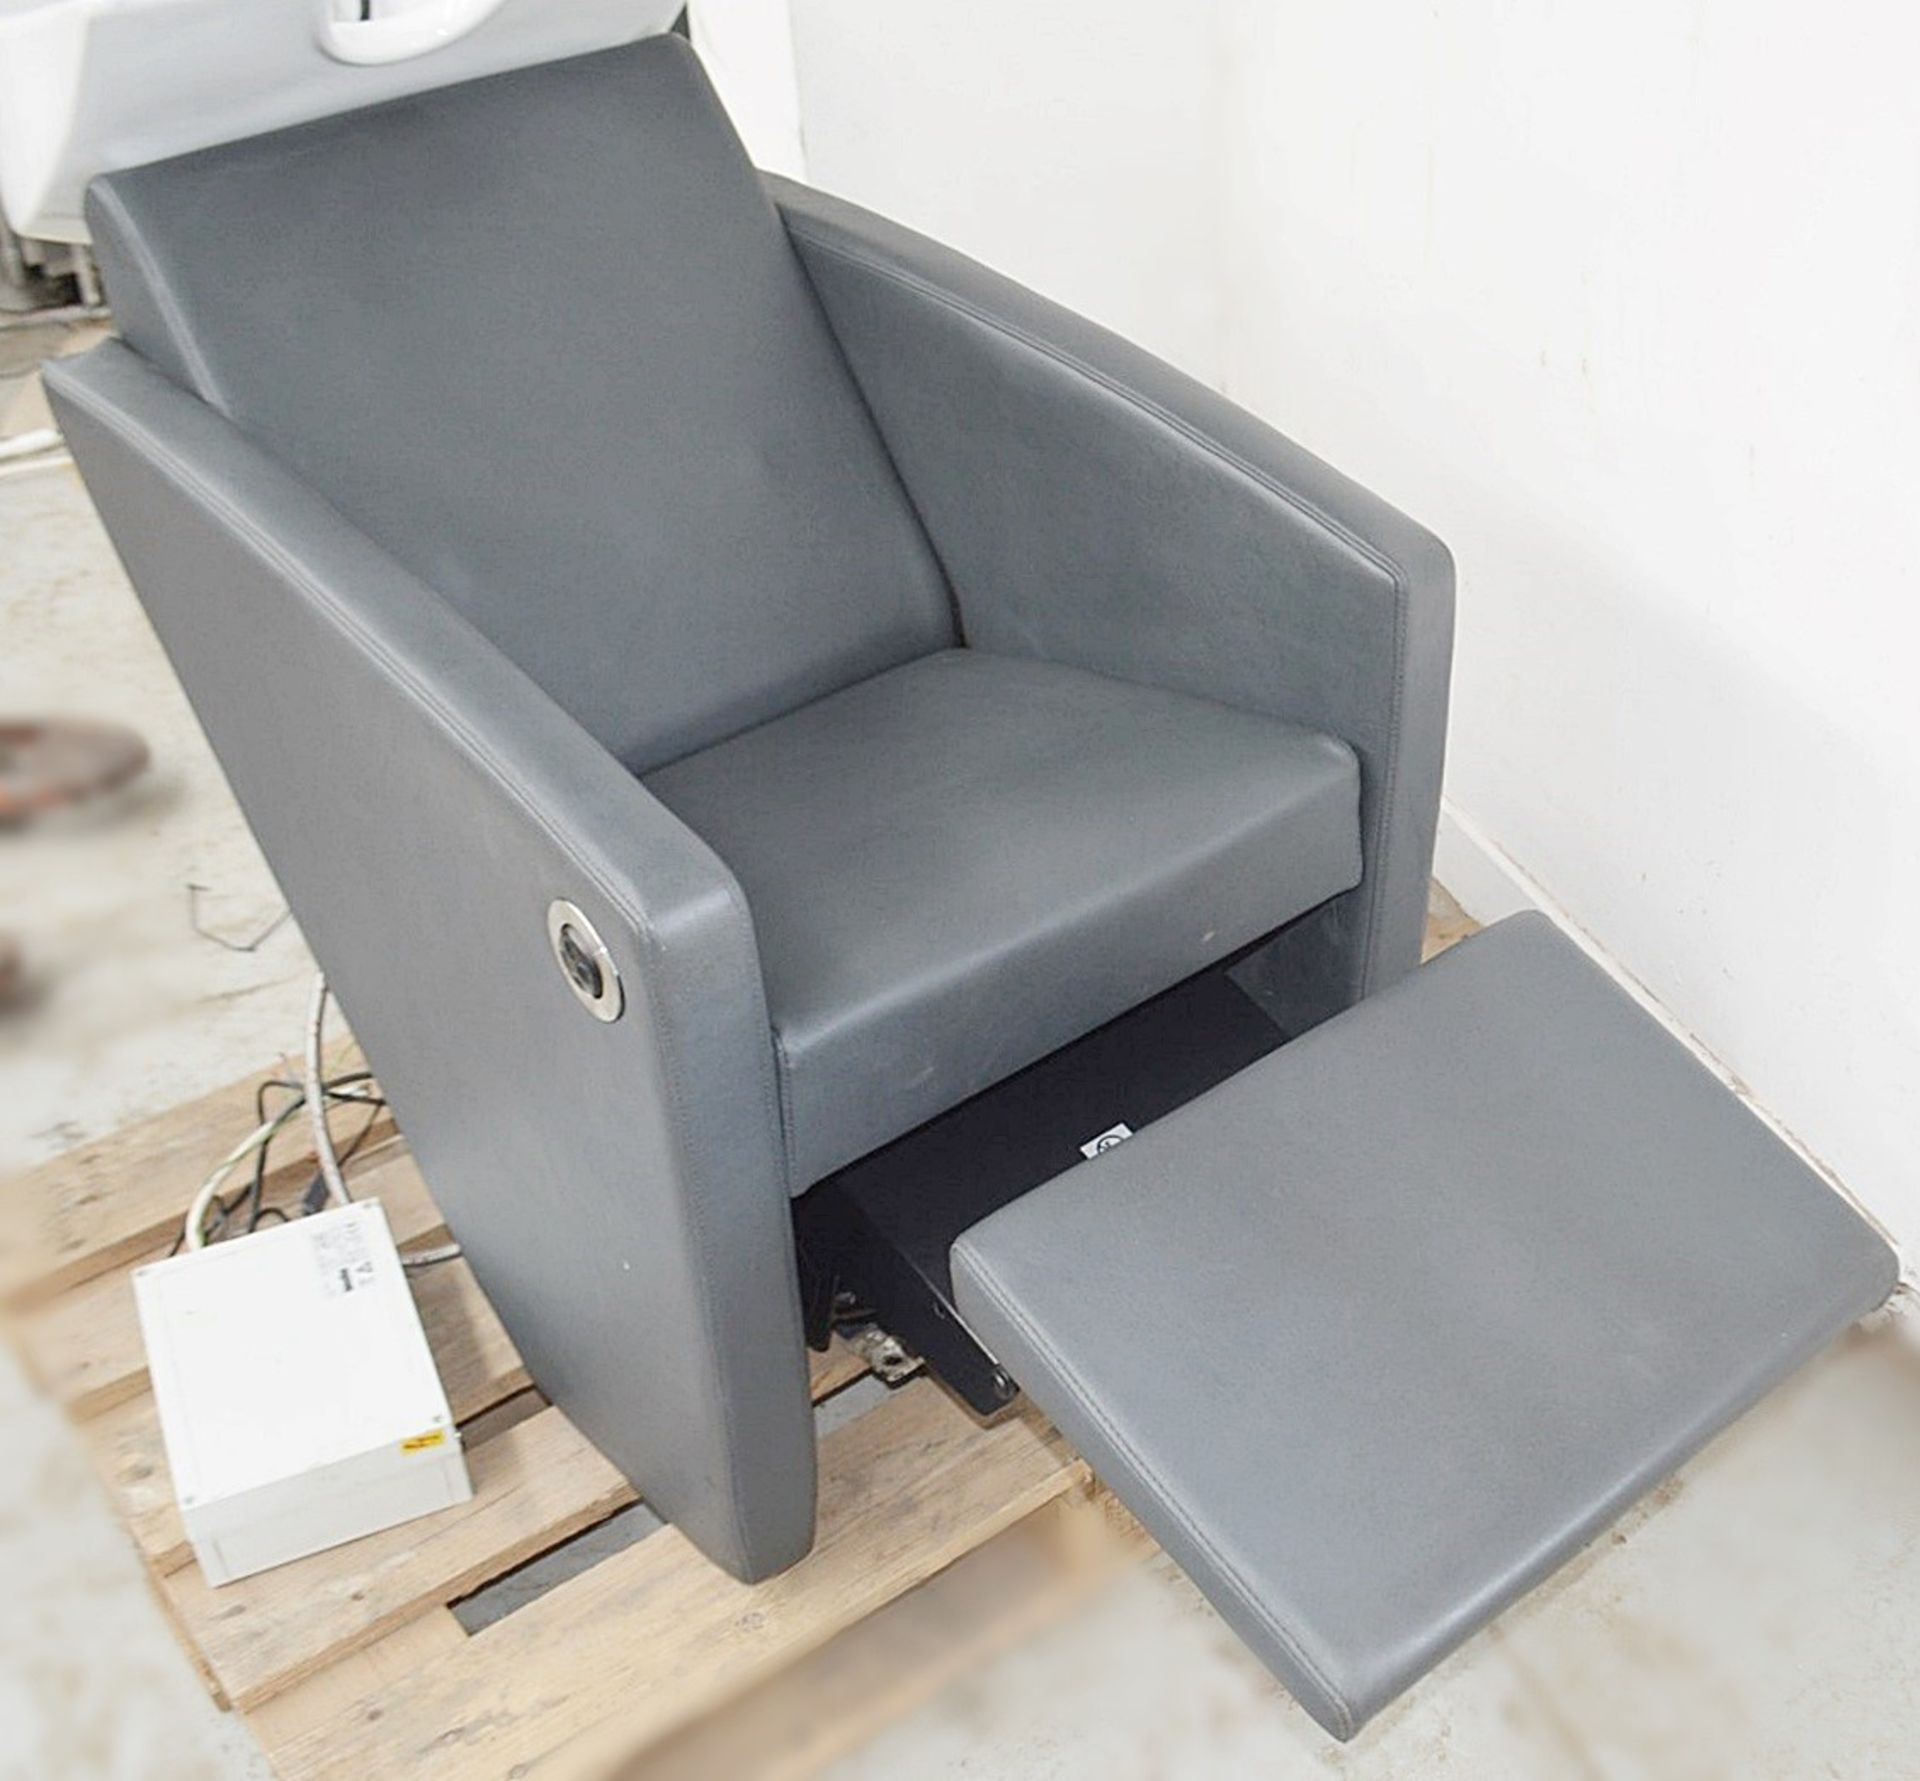 1 x Professional Reclining Hair Washing Chair With Basin Shower And Foot Rest - Dimensions: W60 x - Image 7 of 19